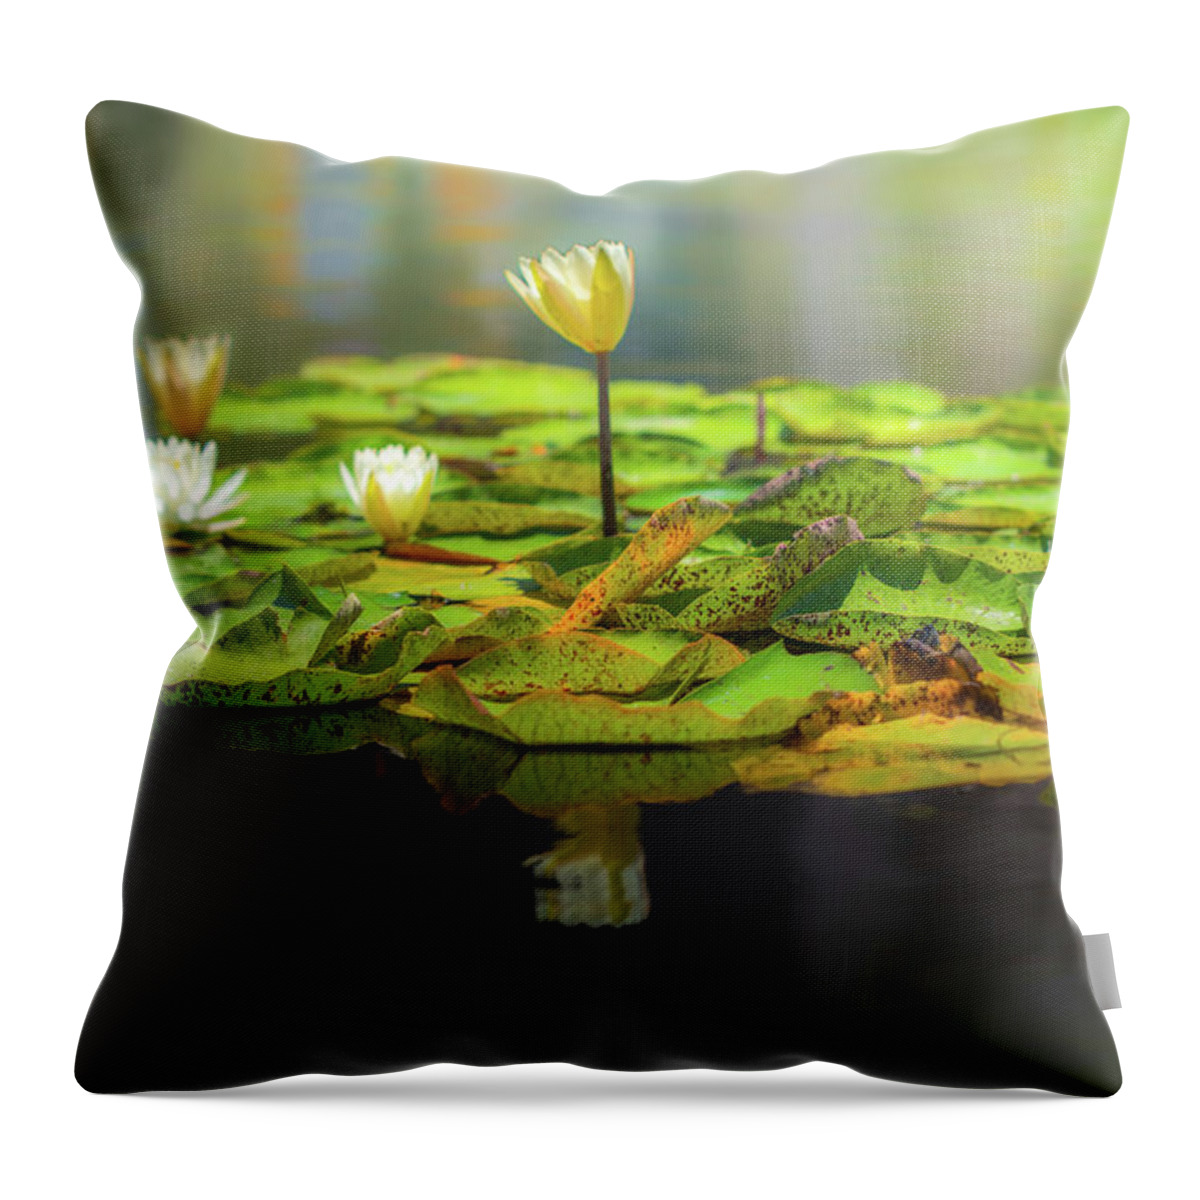 Balboa Park Throw Pillow featuring the photograph Castaways 3 by Ryan Weddle